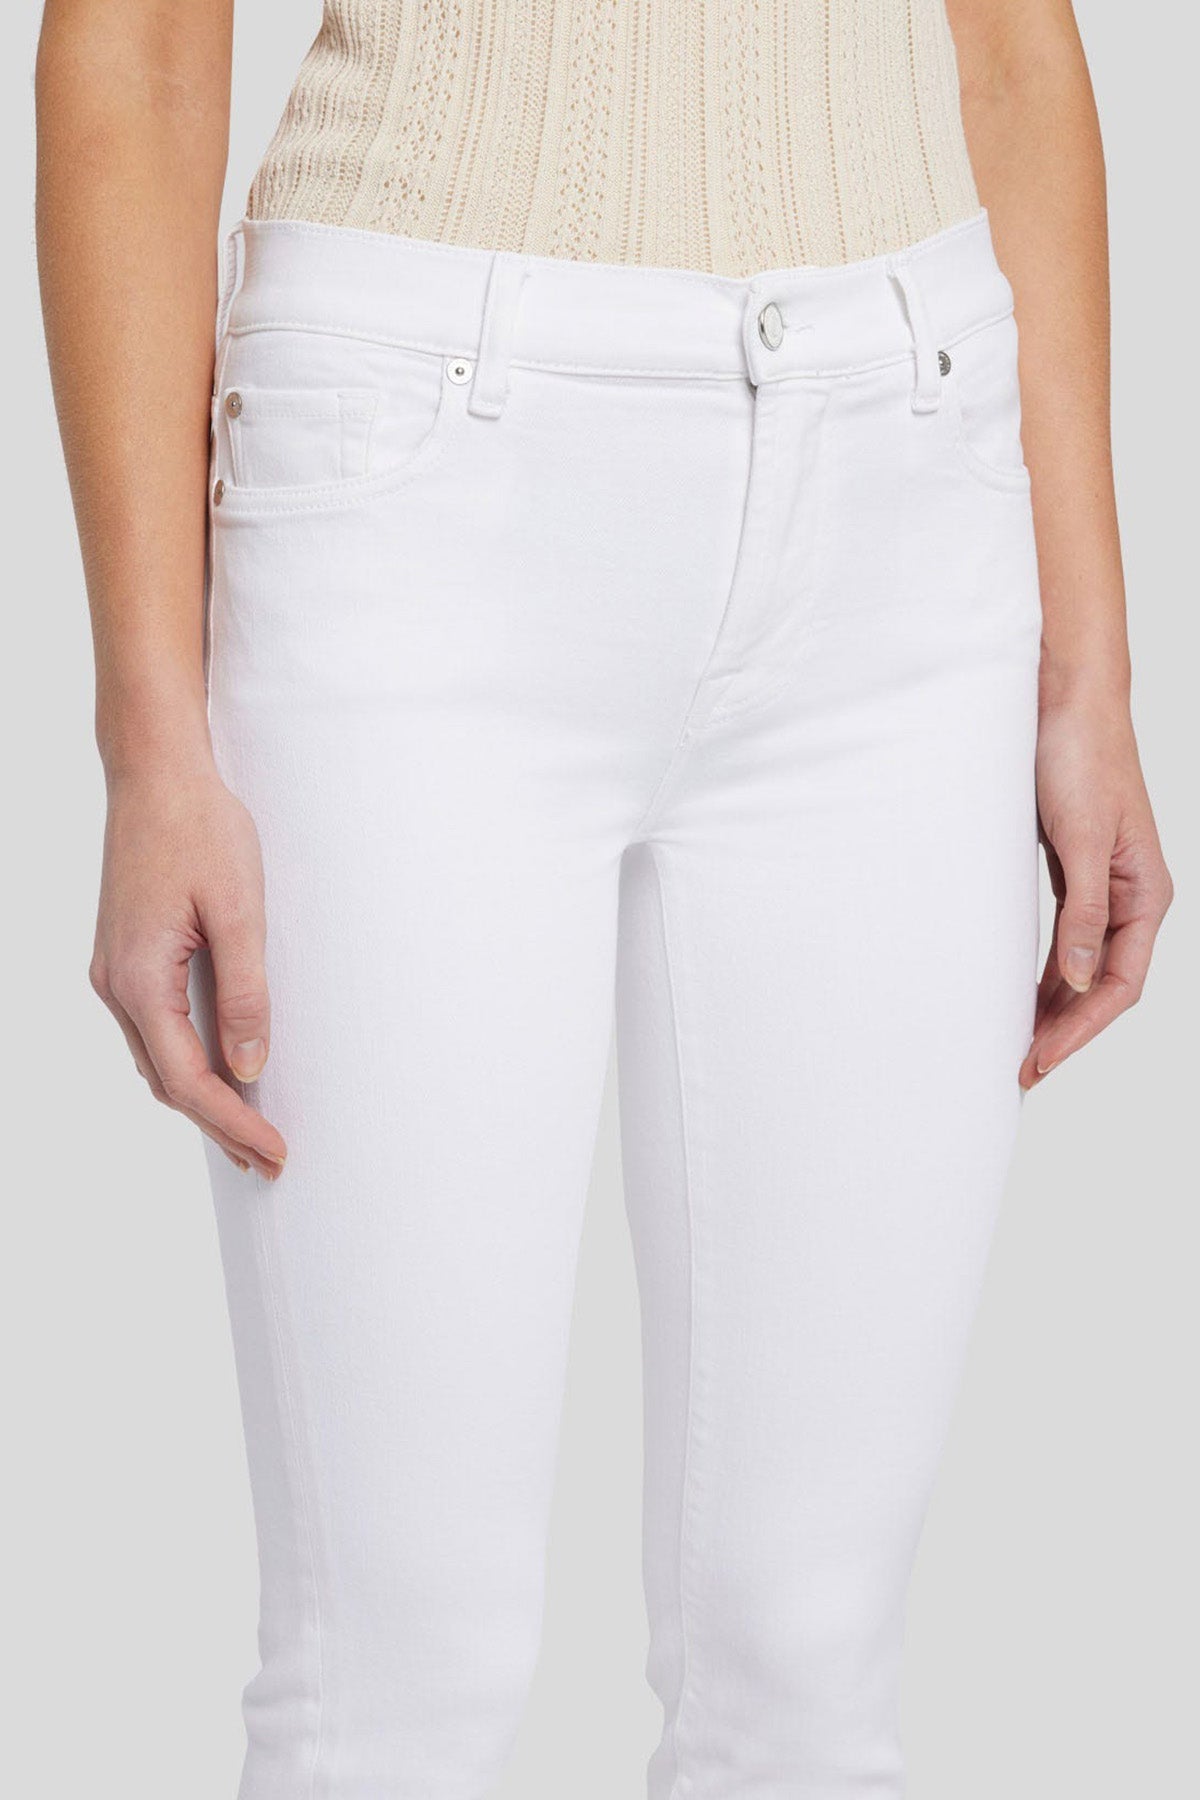 7 For All Mankind Roxanne Ankle Slim Fit Jeans